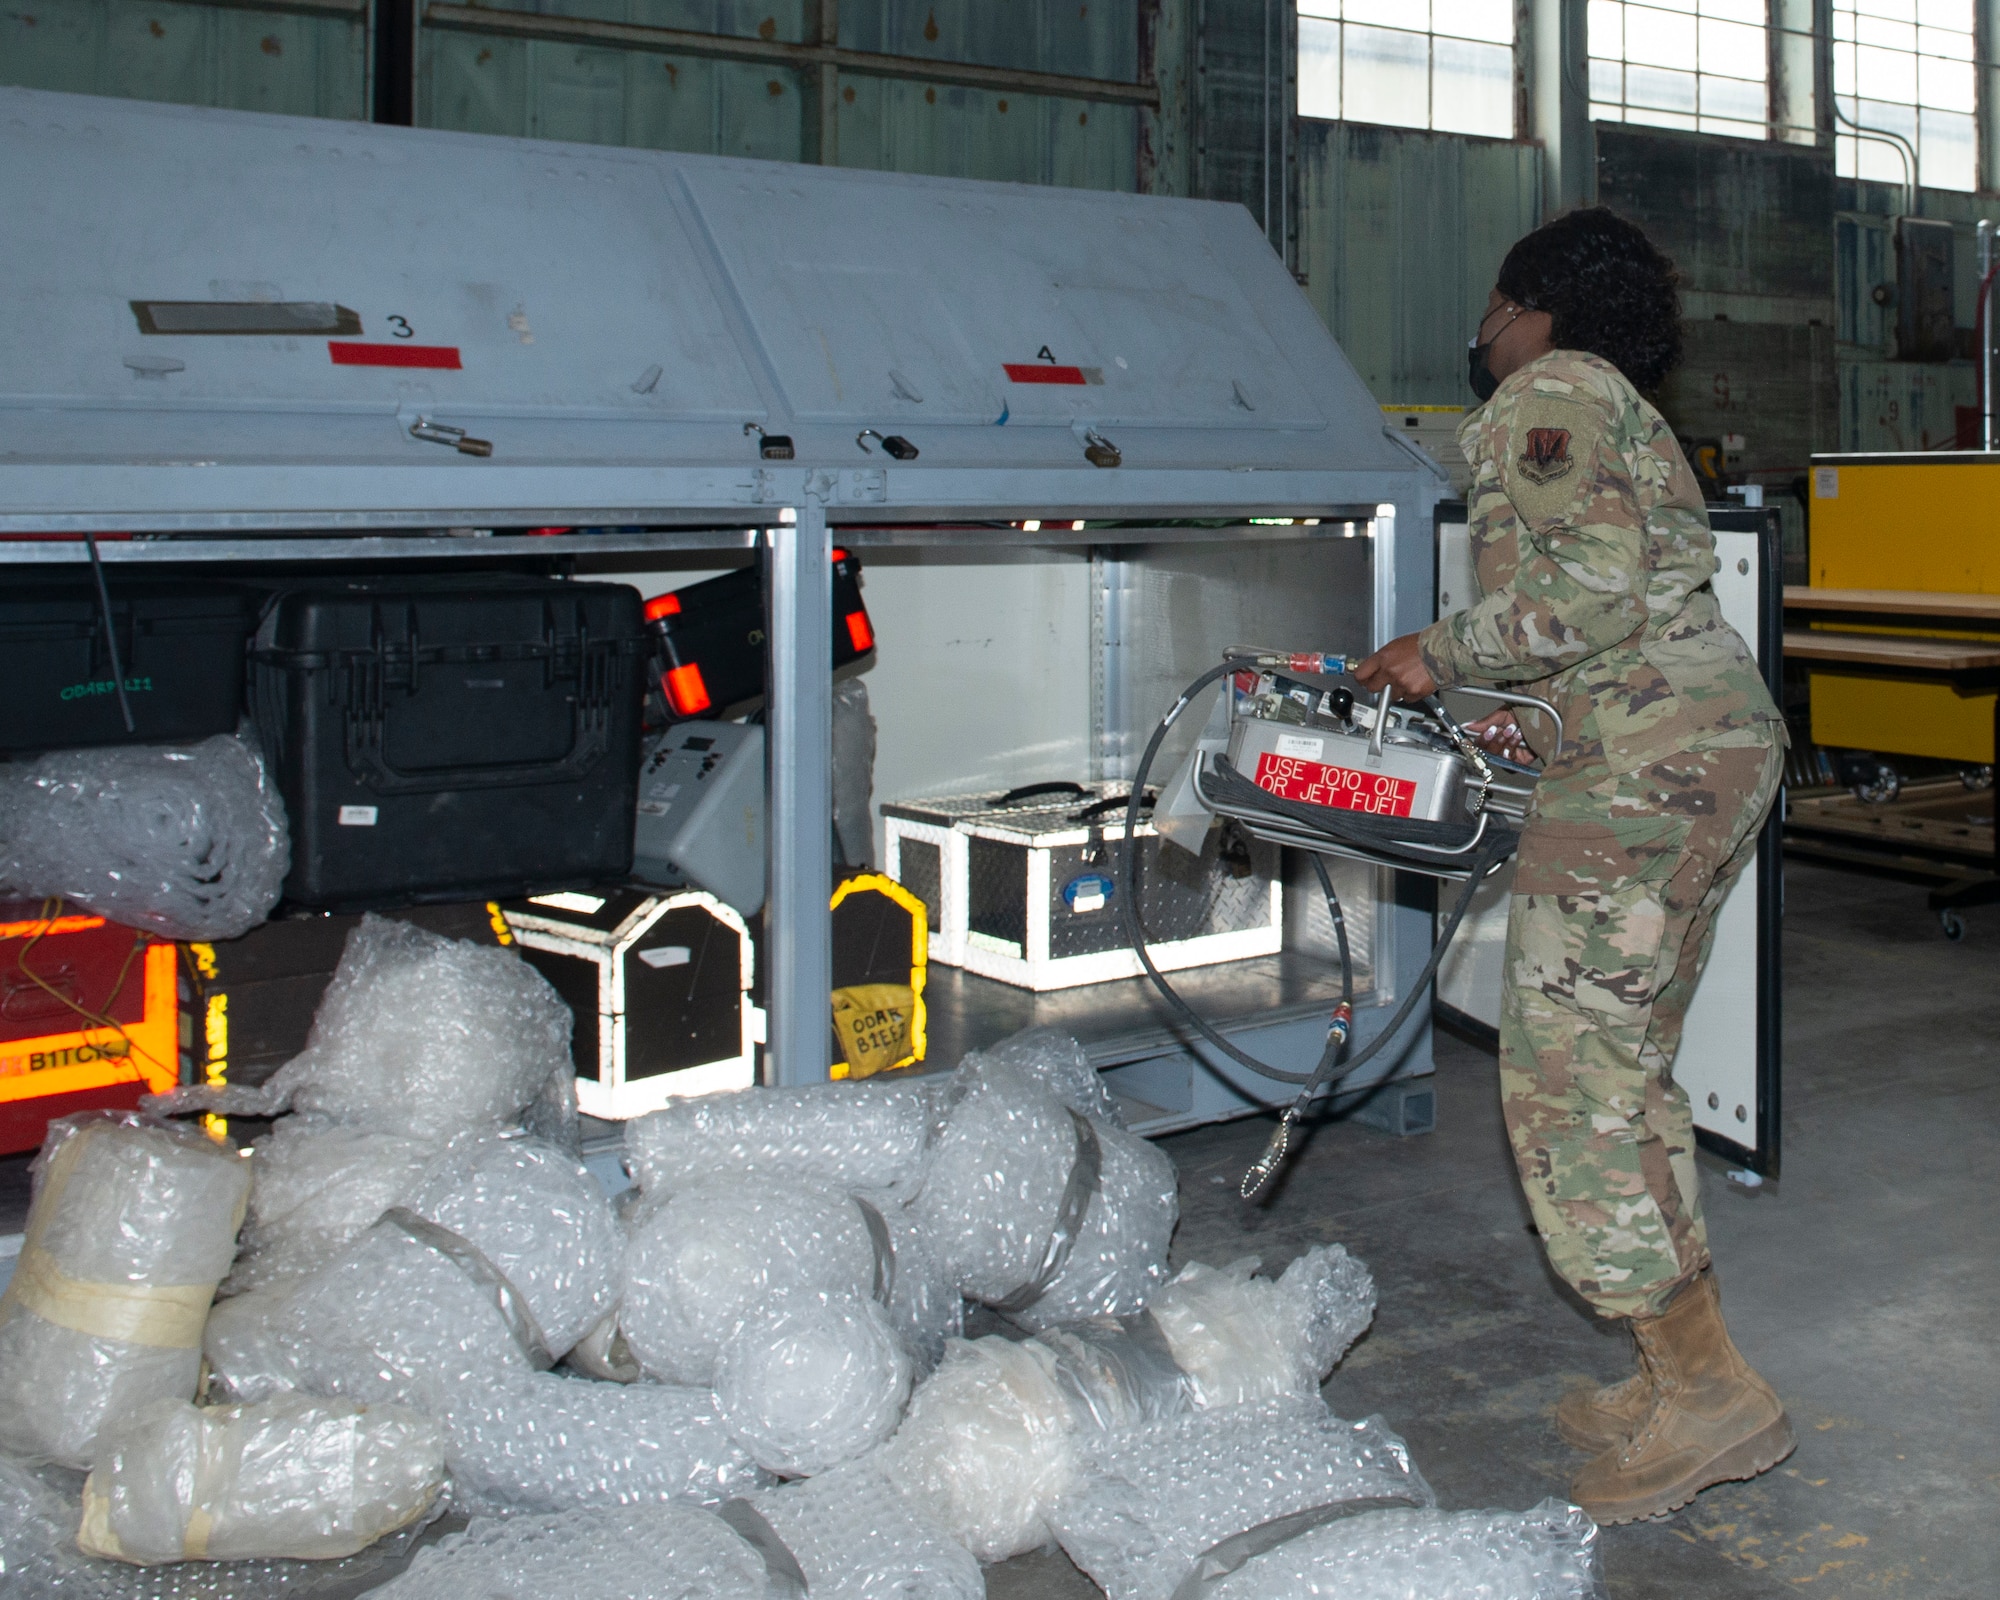 A female Airman carries a small metal box labled use 1010 oil or jet fuel. She is loading onto a large metal box which contains other equipment already packed. in the forefront of image are bubble wrapped equipment on the floor; waiting to also be loaded onto container